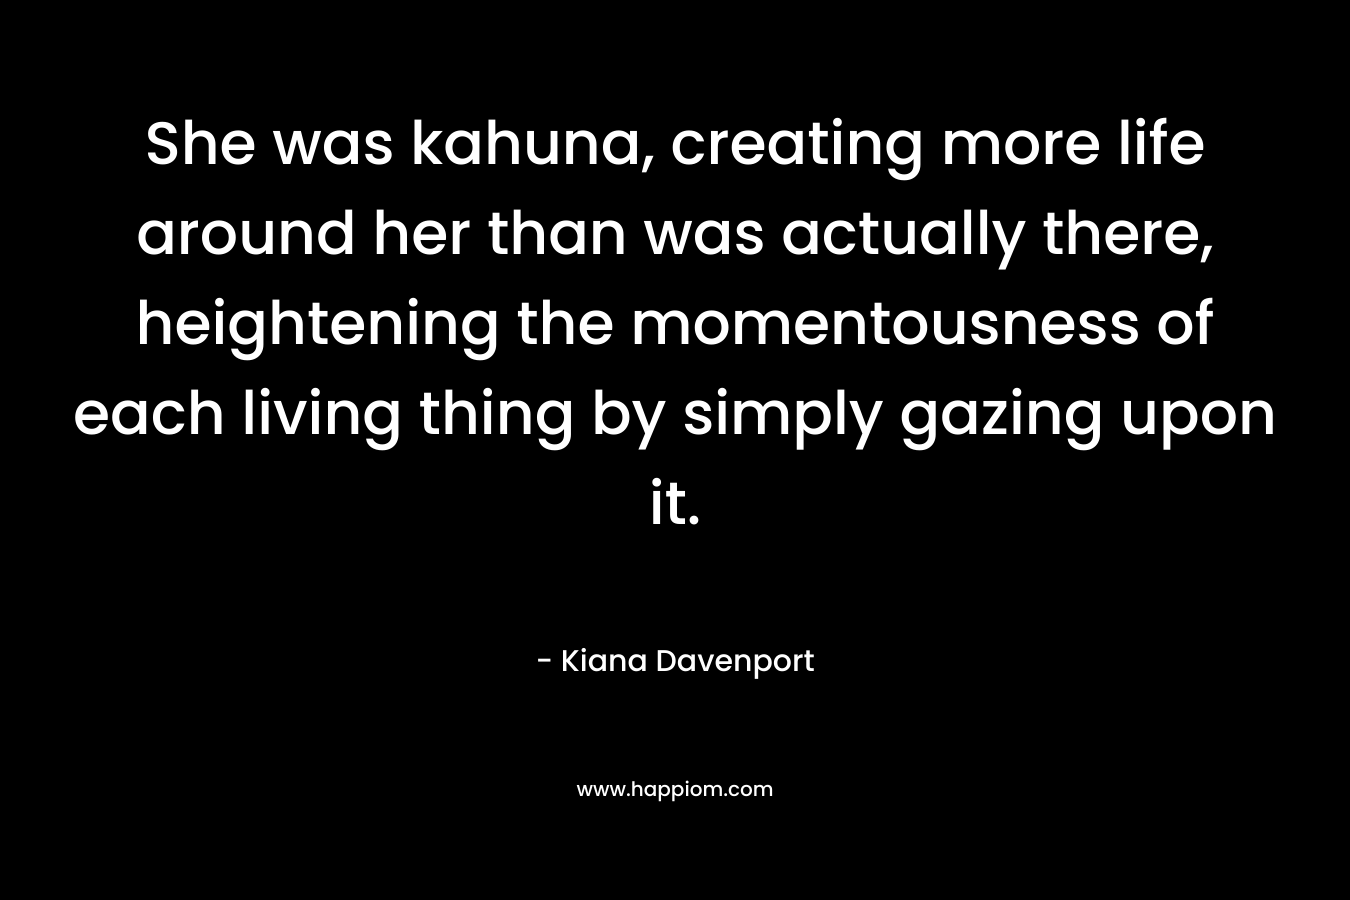 She was kahuna, creating more life around her than was actually there, heightening the momentousness of each living thing by simply gazing upon it.